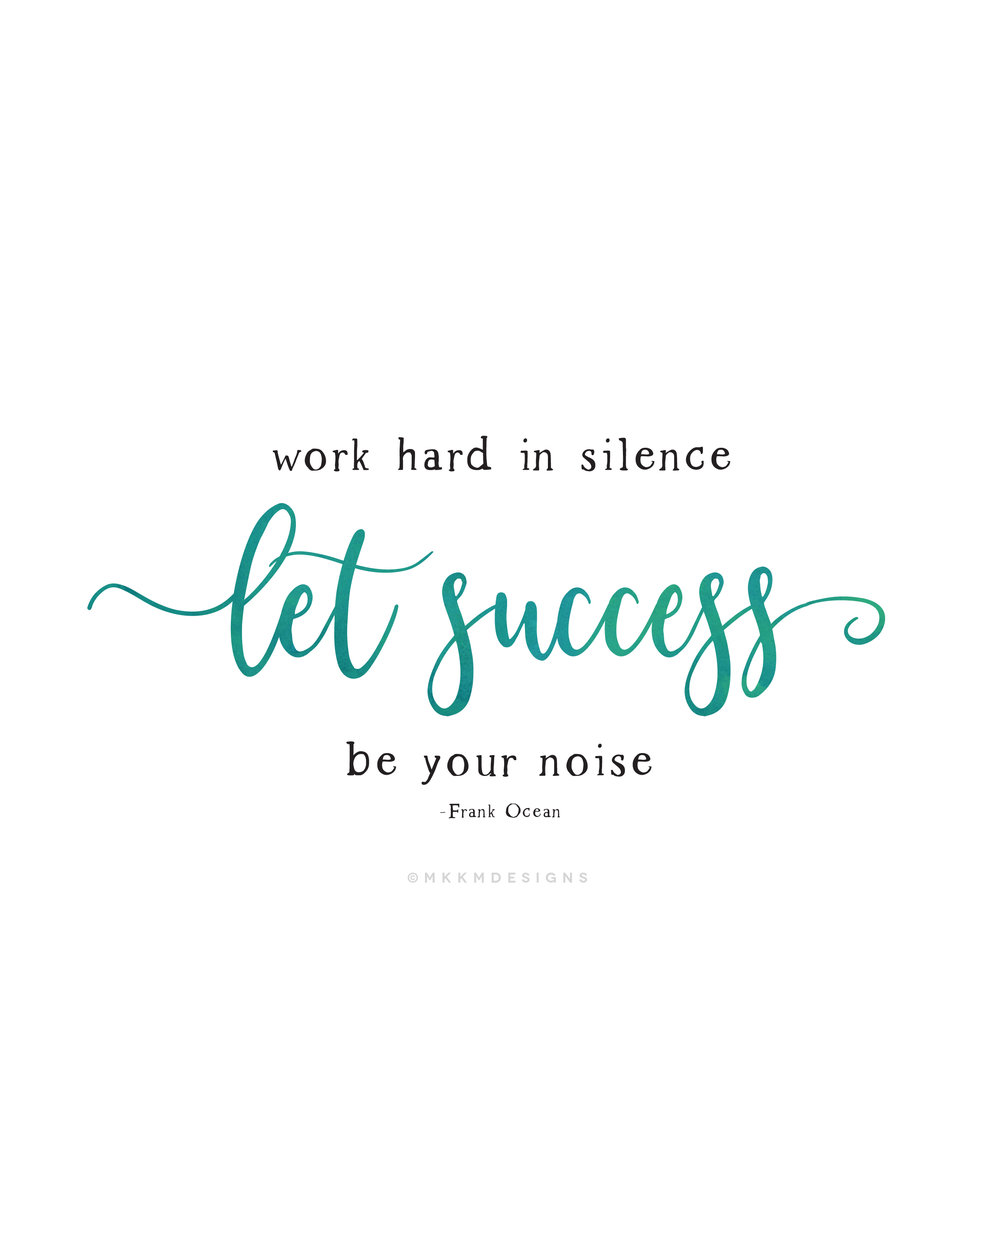 work hard in silence, let success be your noise. ✦ Quote of the day ✦ monday motivation // ✦ mkkmdesigns